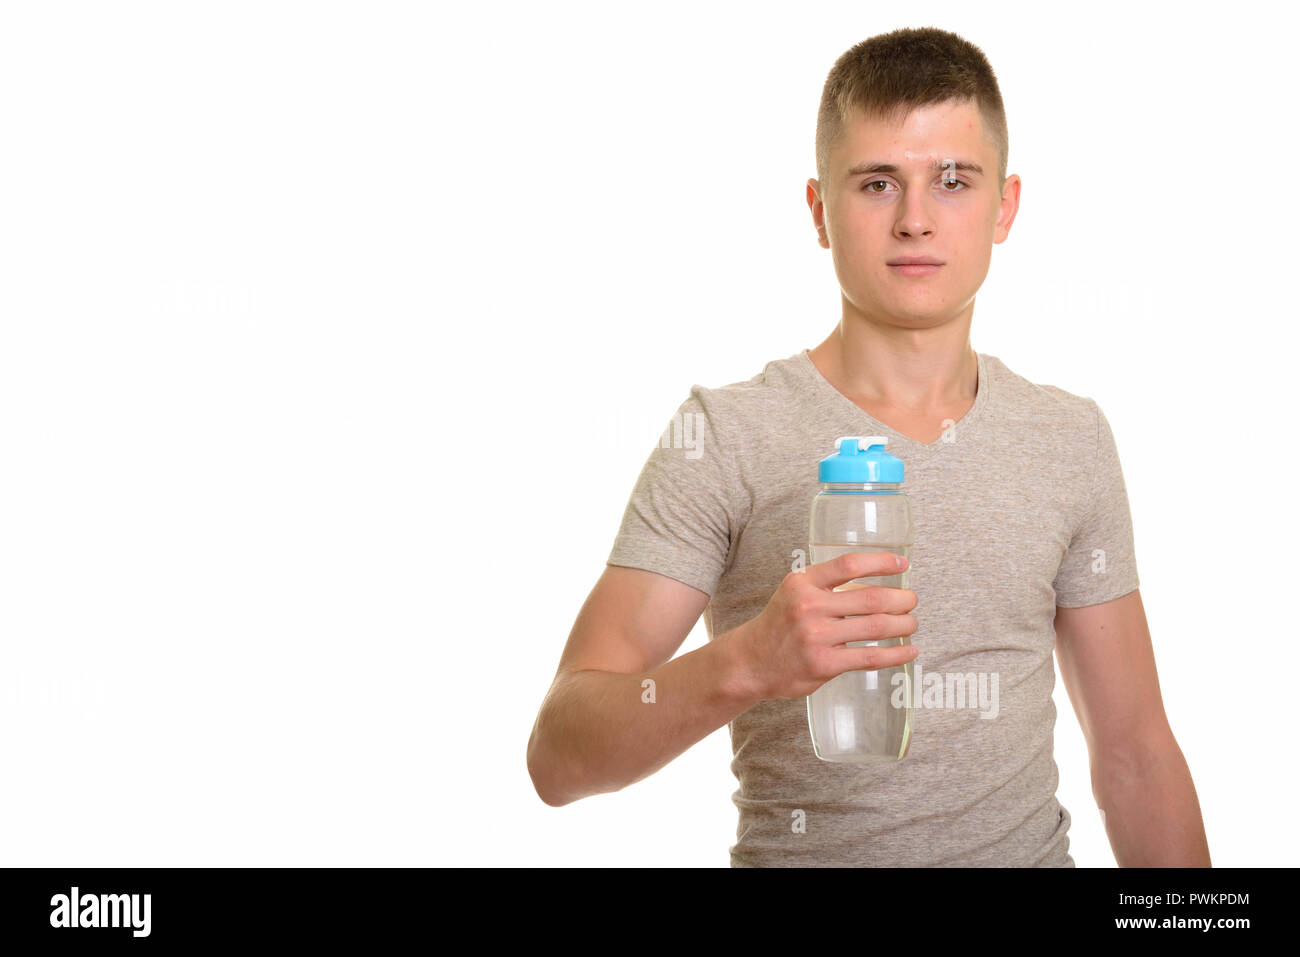 Young Caucasian man holding water bottle and looking at camera Banque D'Images